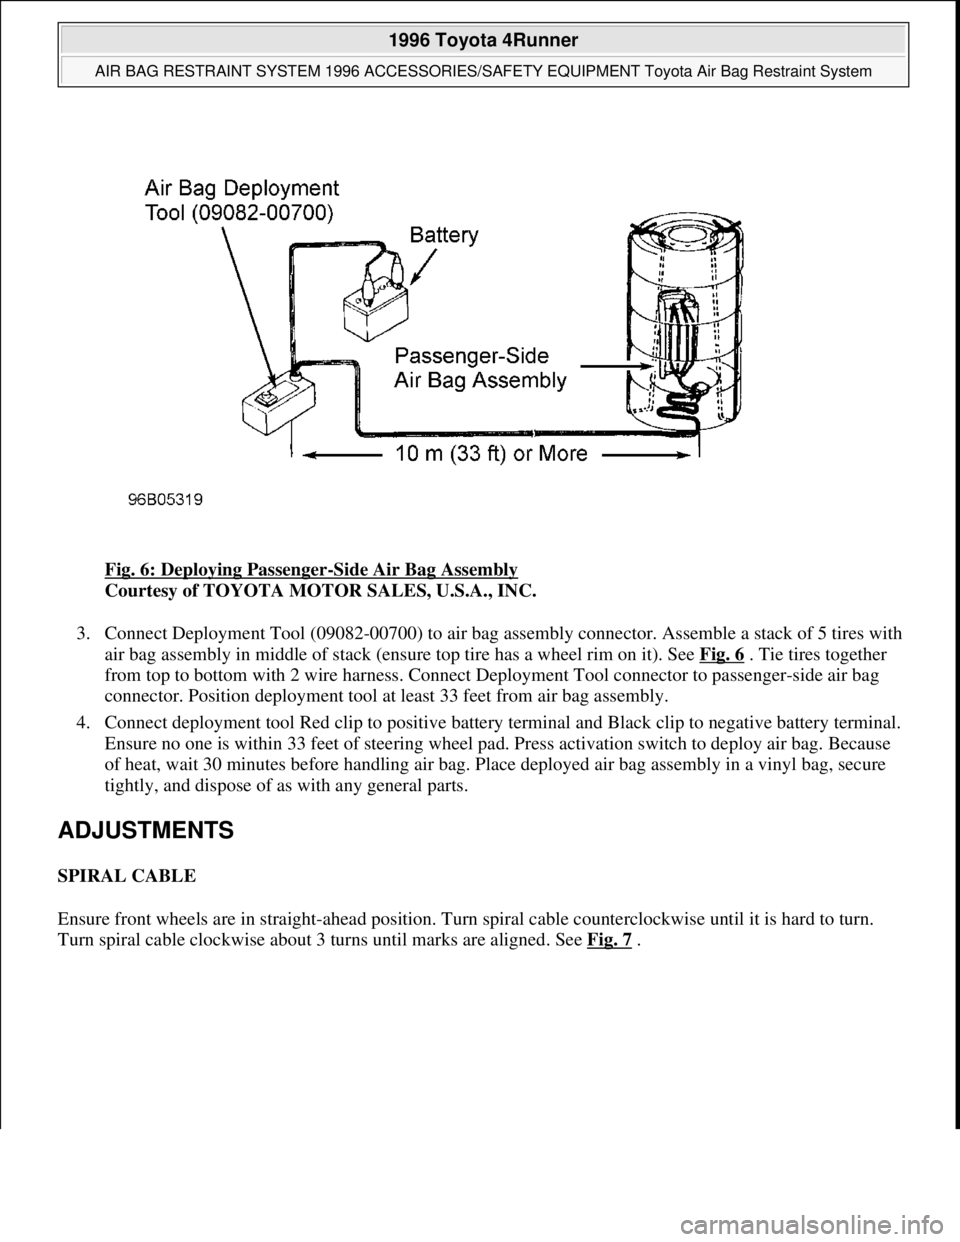 TOYOTA RAV4 1996  Service Repair Manual Fig. 6: Deploying Passenger-Side Air Bag Assembly 
Courtesy of TOYOTA MOTOR SALES, U.S.A., INC. 
3. Connect Deployment Tool (09082-00700) to air bag assembly connector. Assemble a stack of 5 tires wit